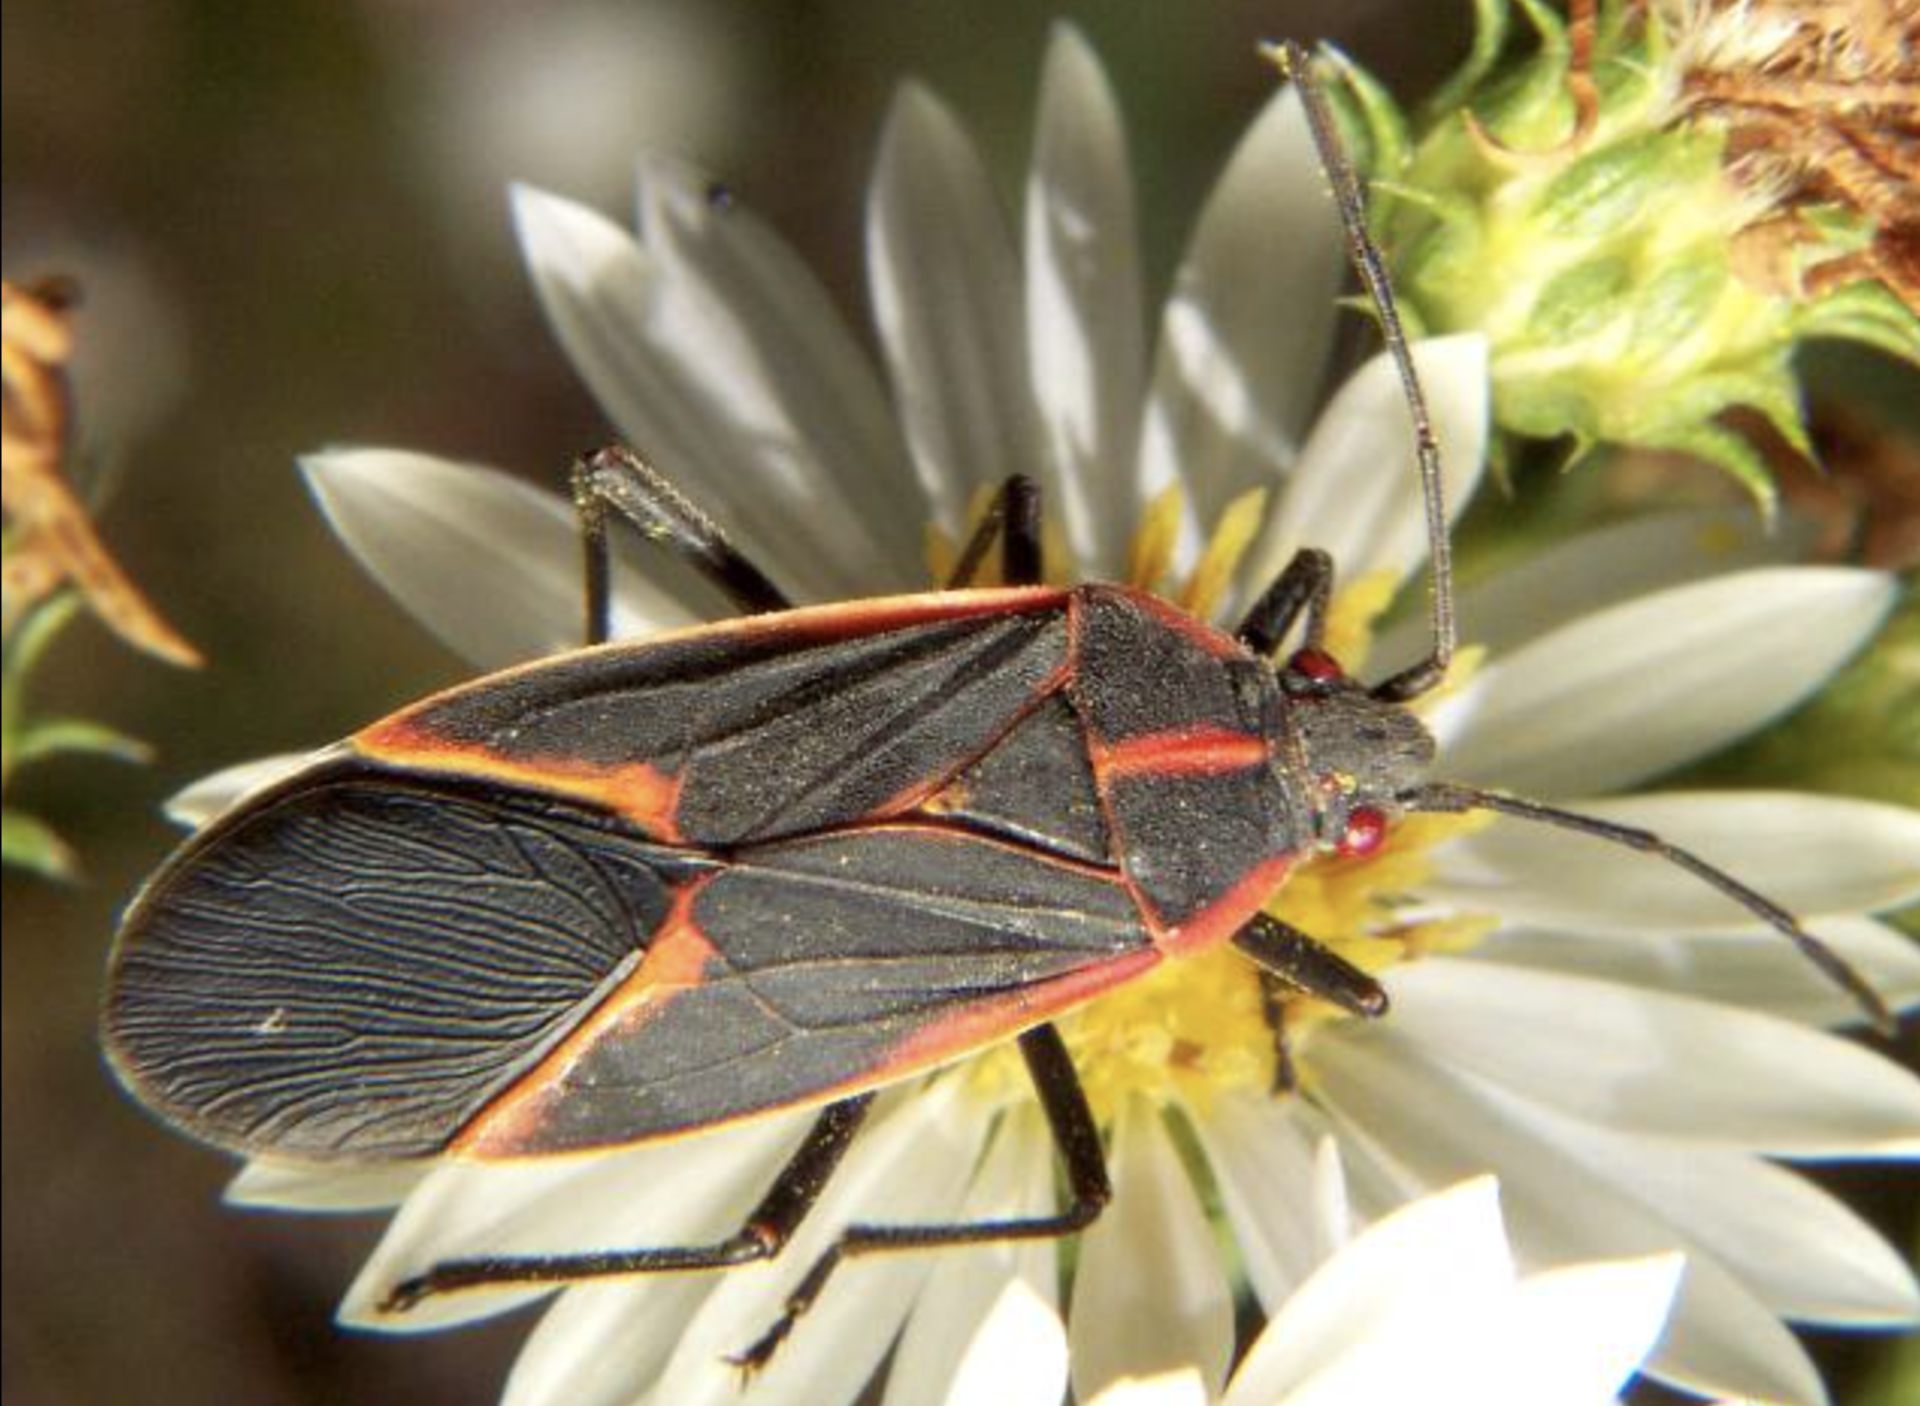 Have you seen the boxelder bug around your home? Relax, it's mostly harmless